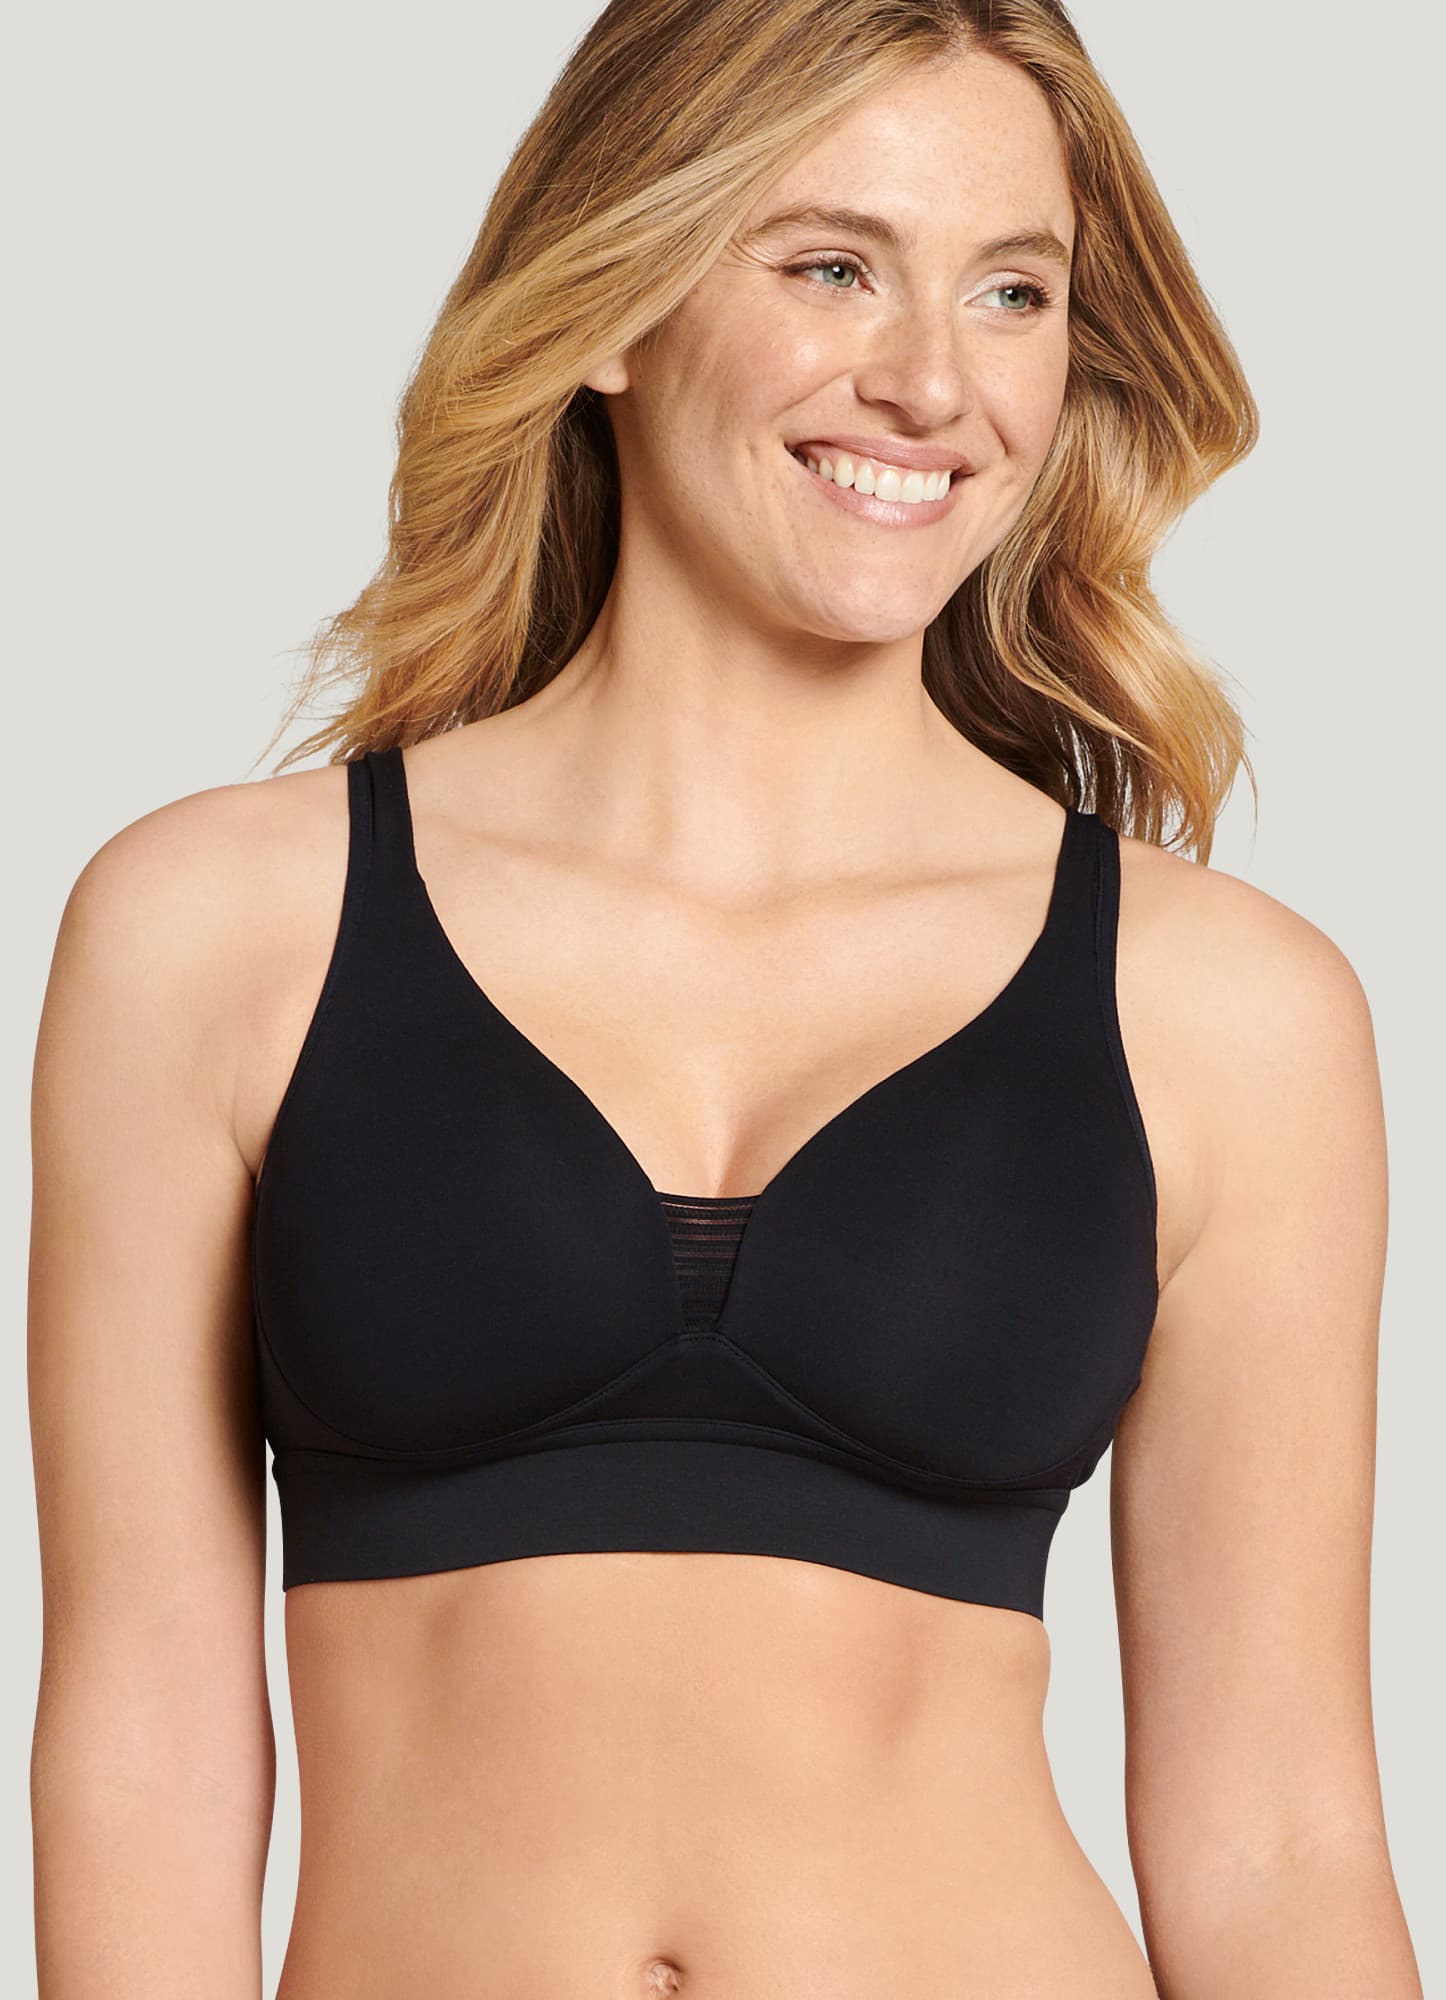 Embrace softness and lasting support with Jockey Forever Fit™ Full